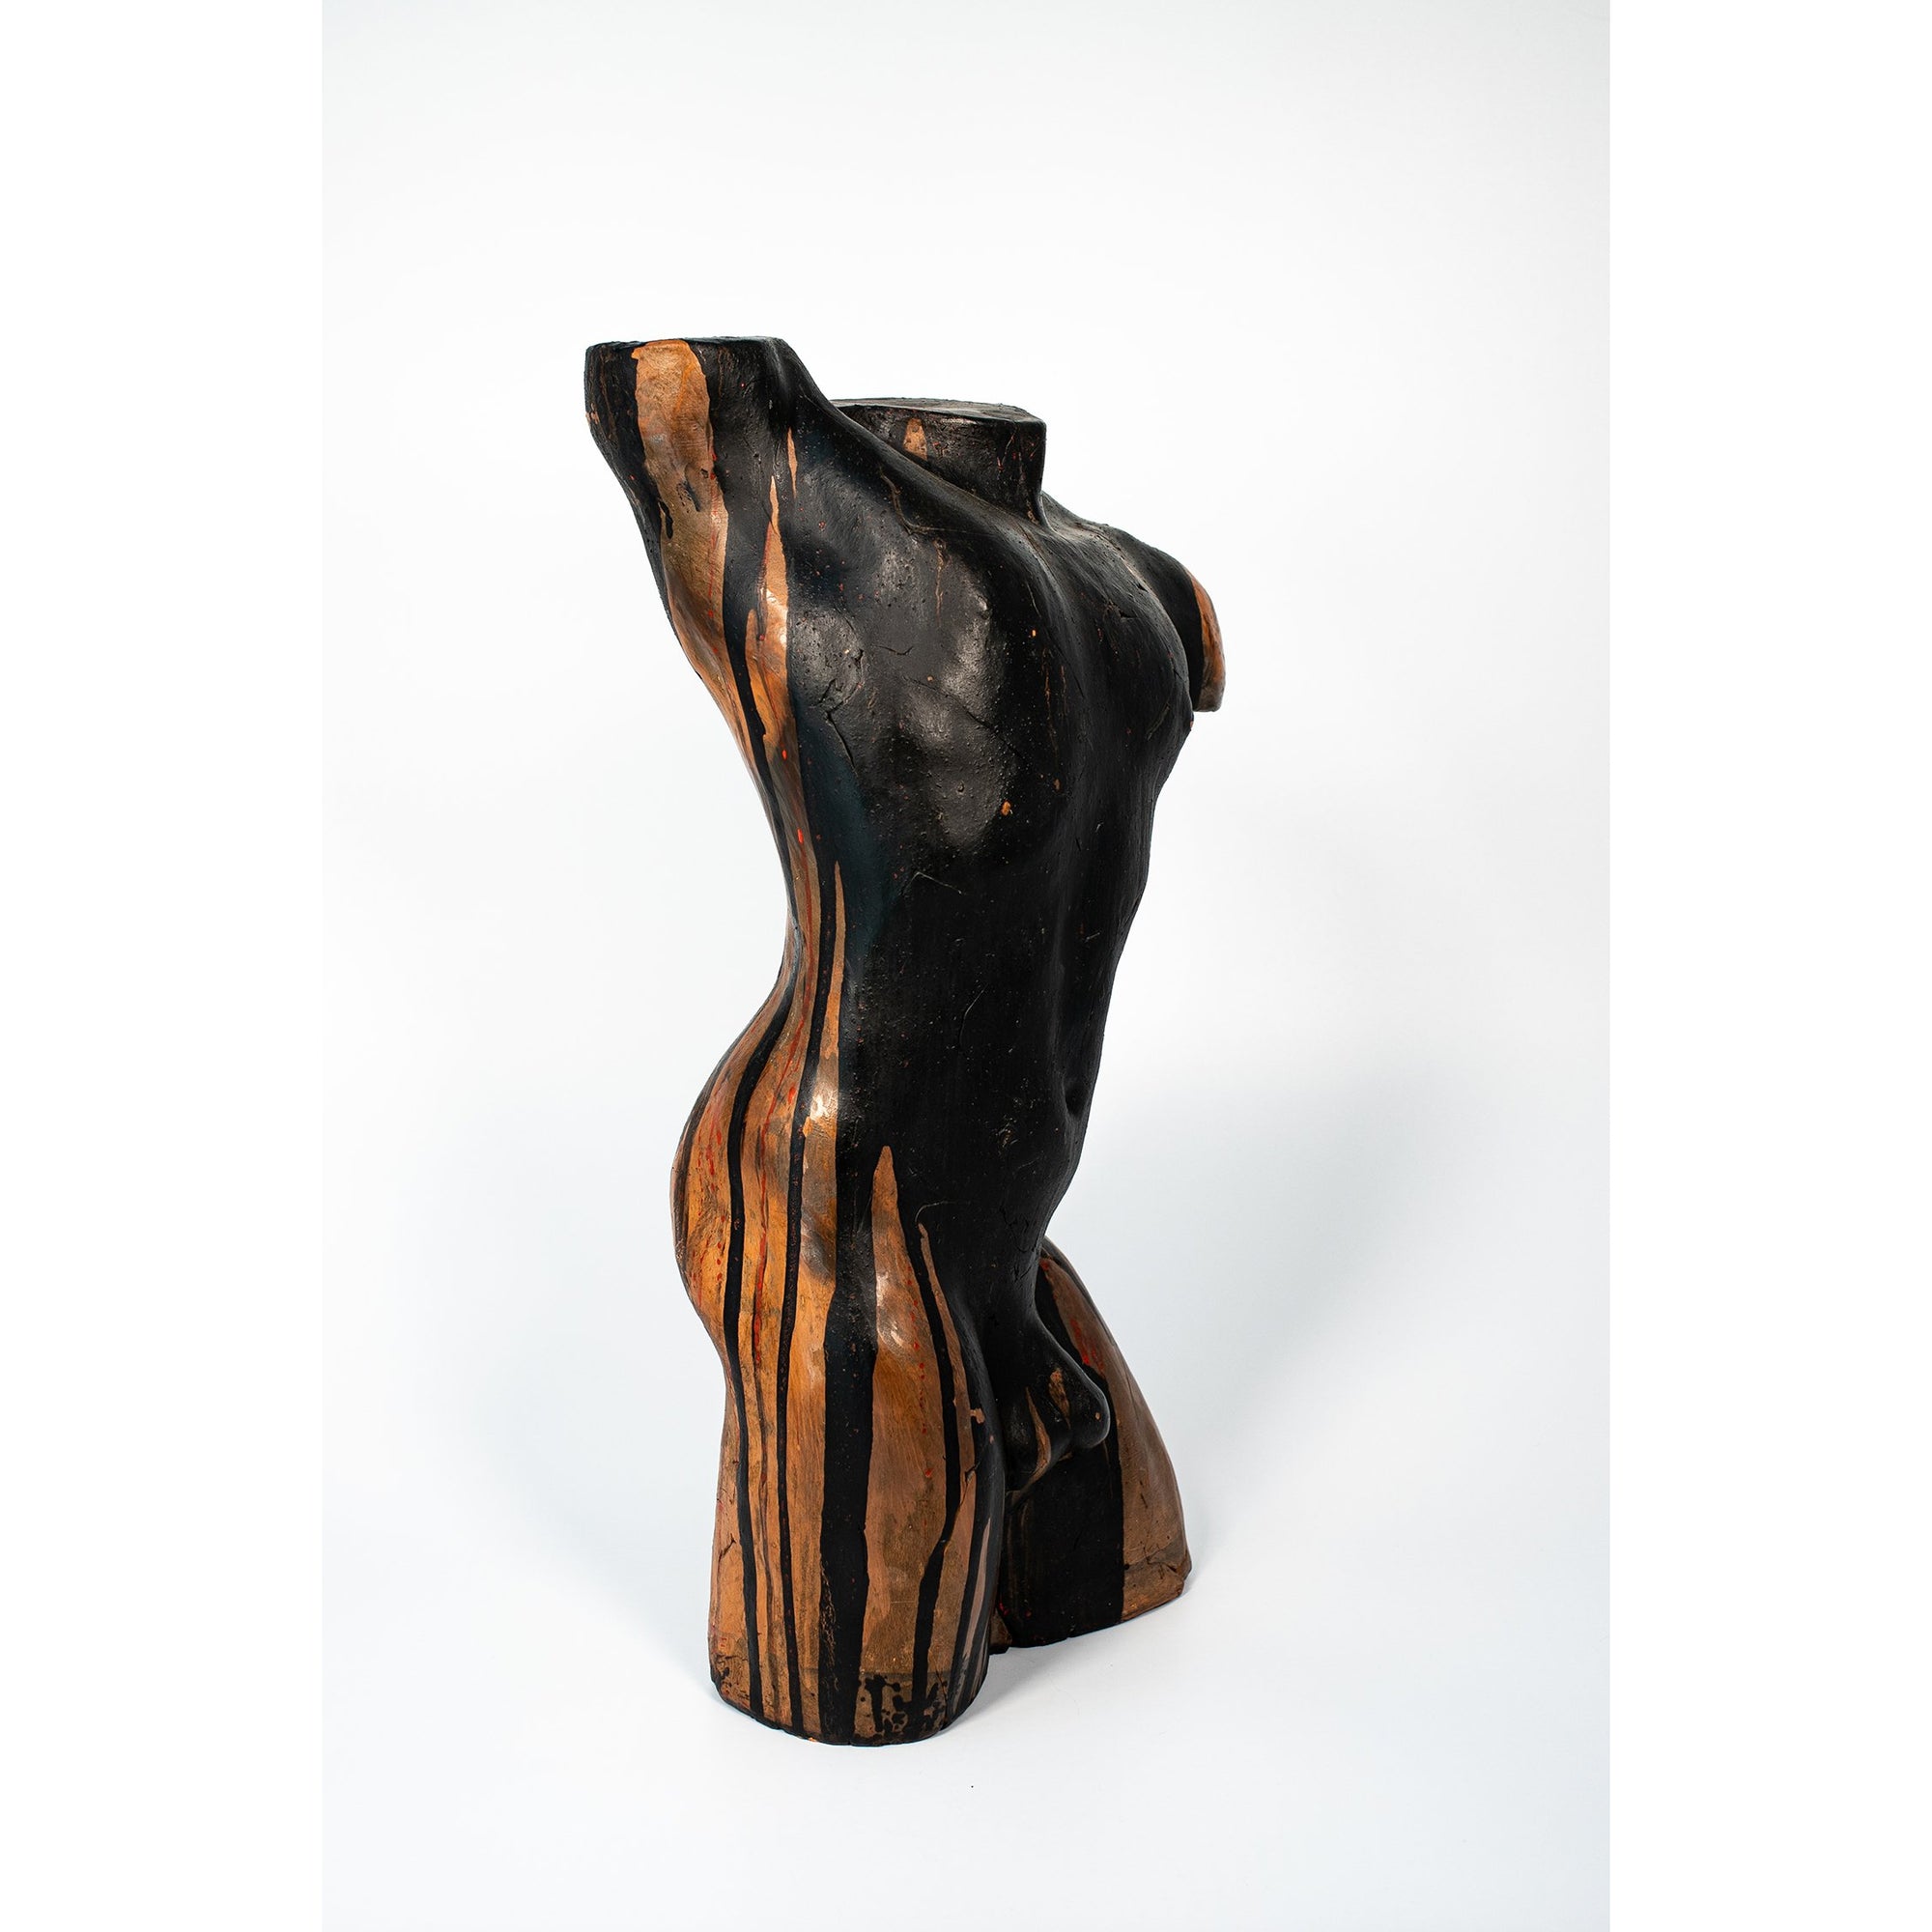 Ni, Glazed terracotta standing figure, by Sophie Howard, available from Padstow Gallery, Cornwall